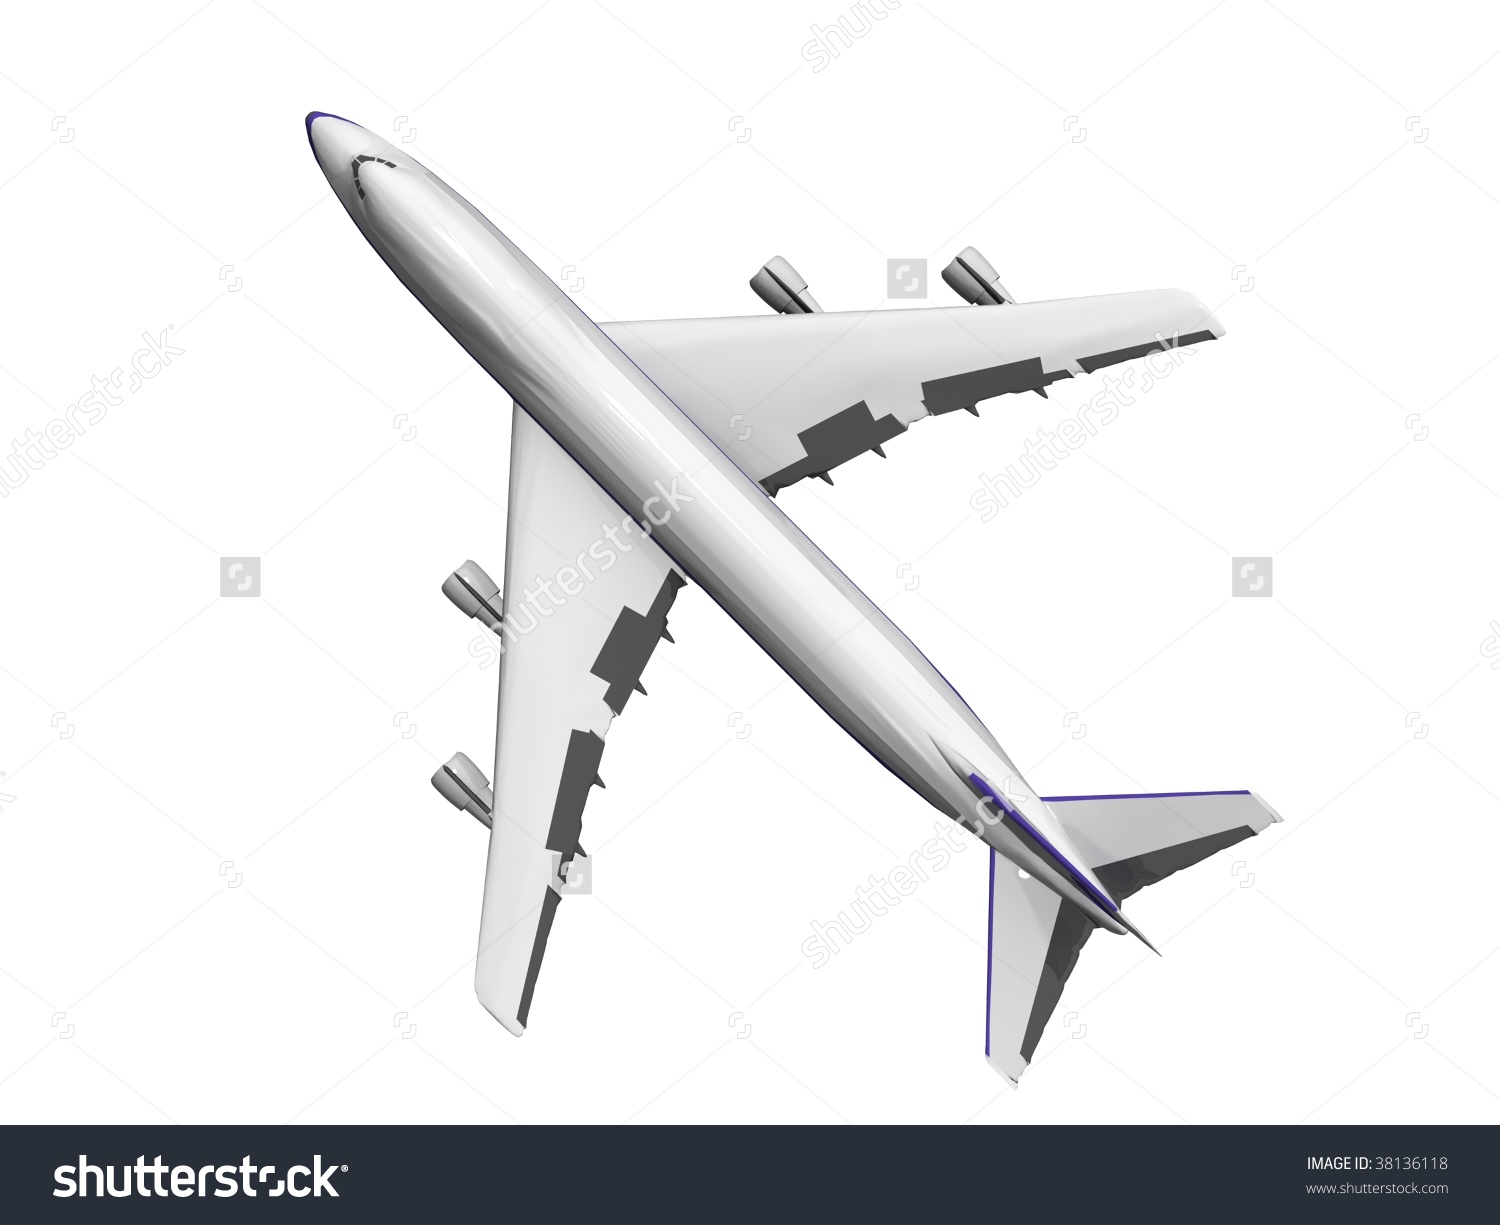 clipart airplane top - photo #26